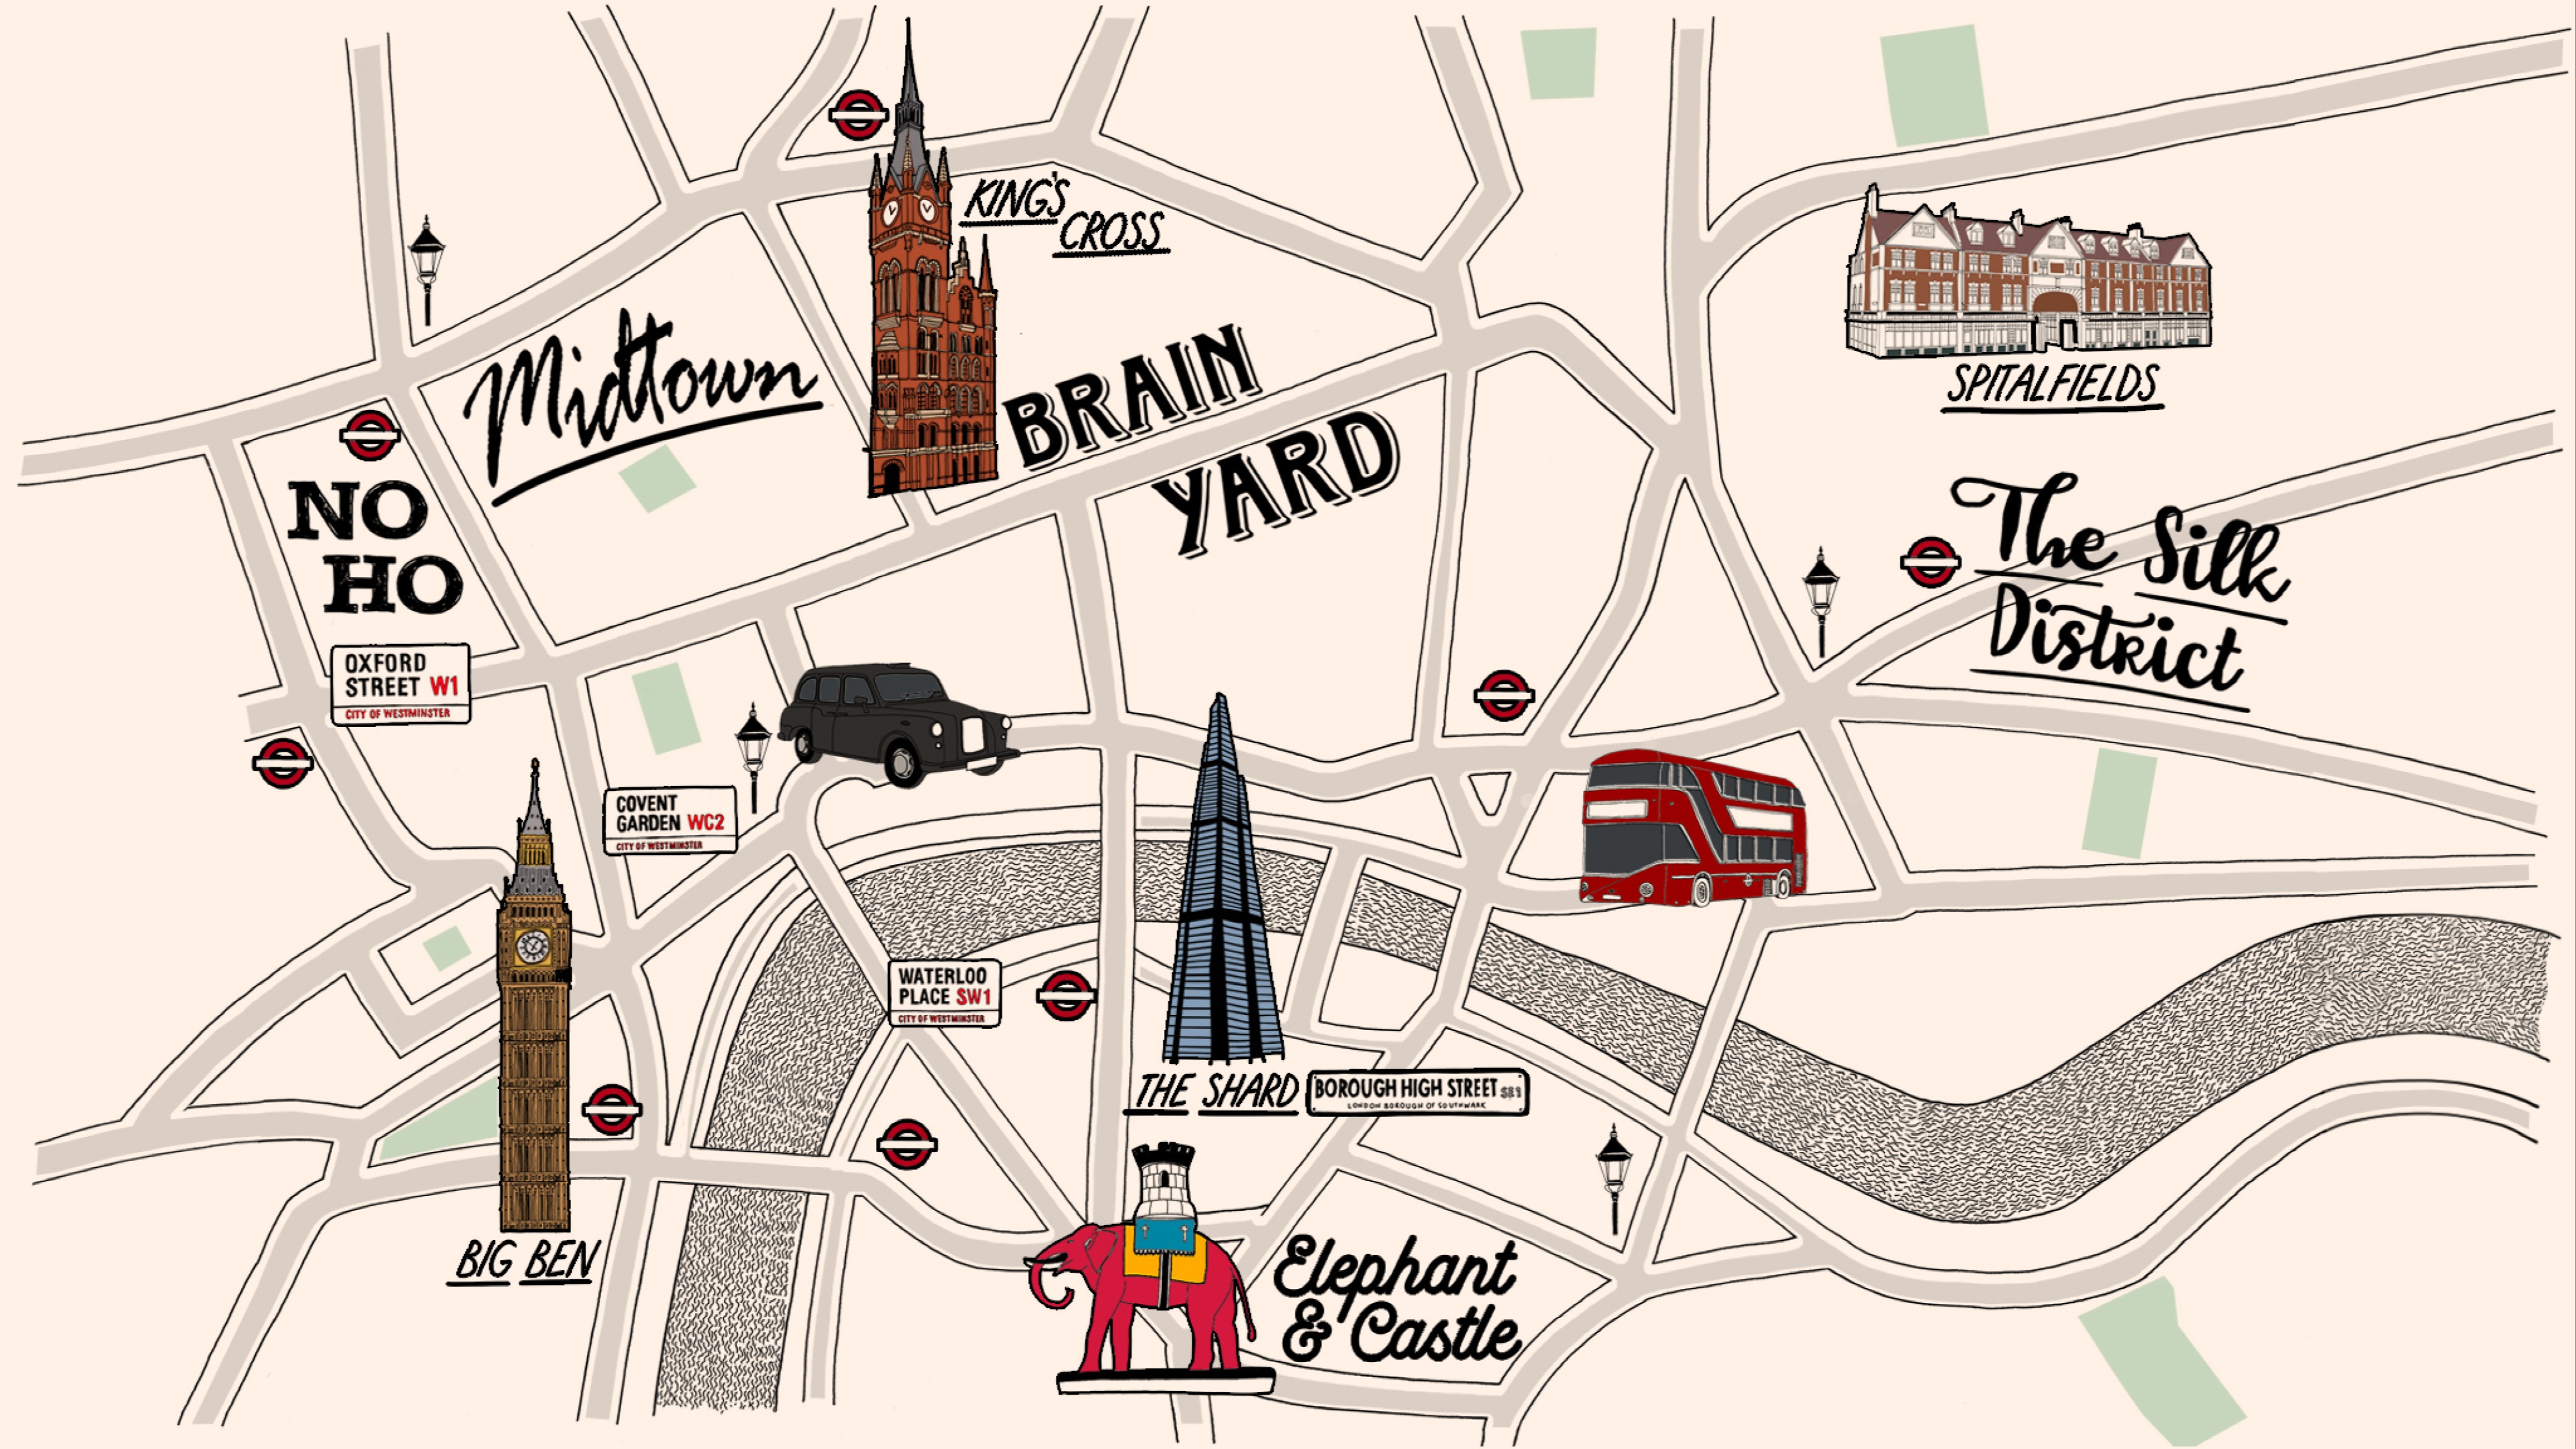 The London districts nobody knows: where are NoHo, Midtown and ...